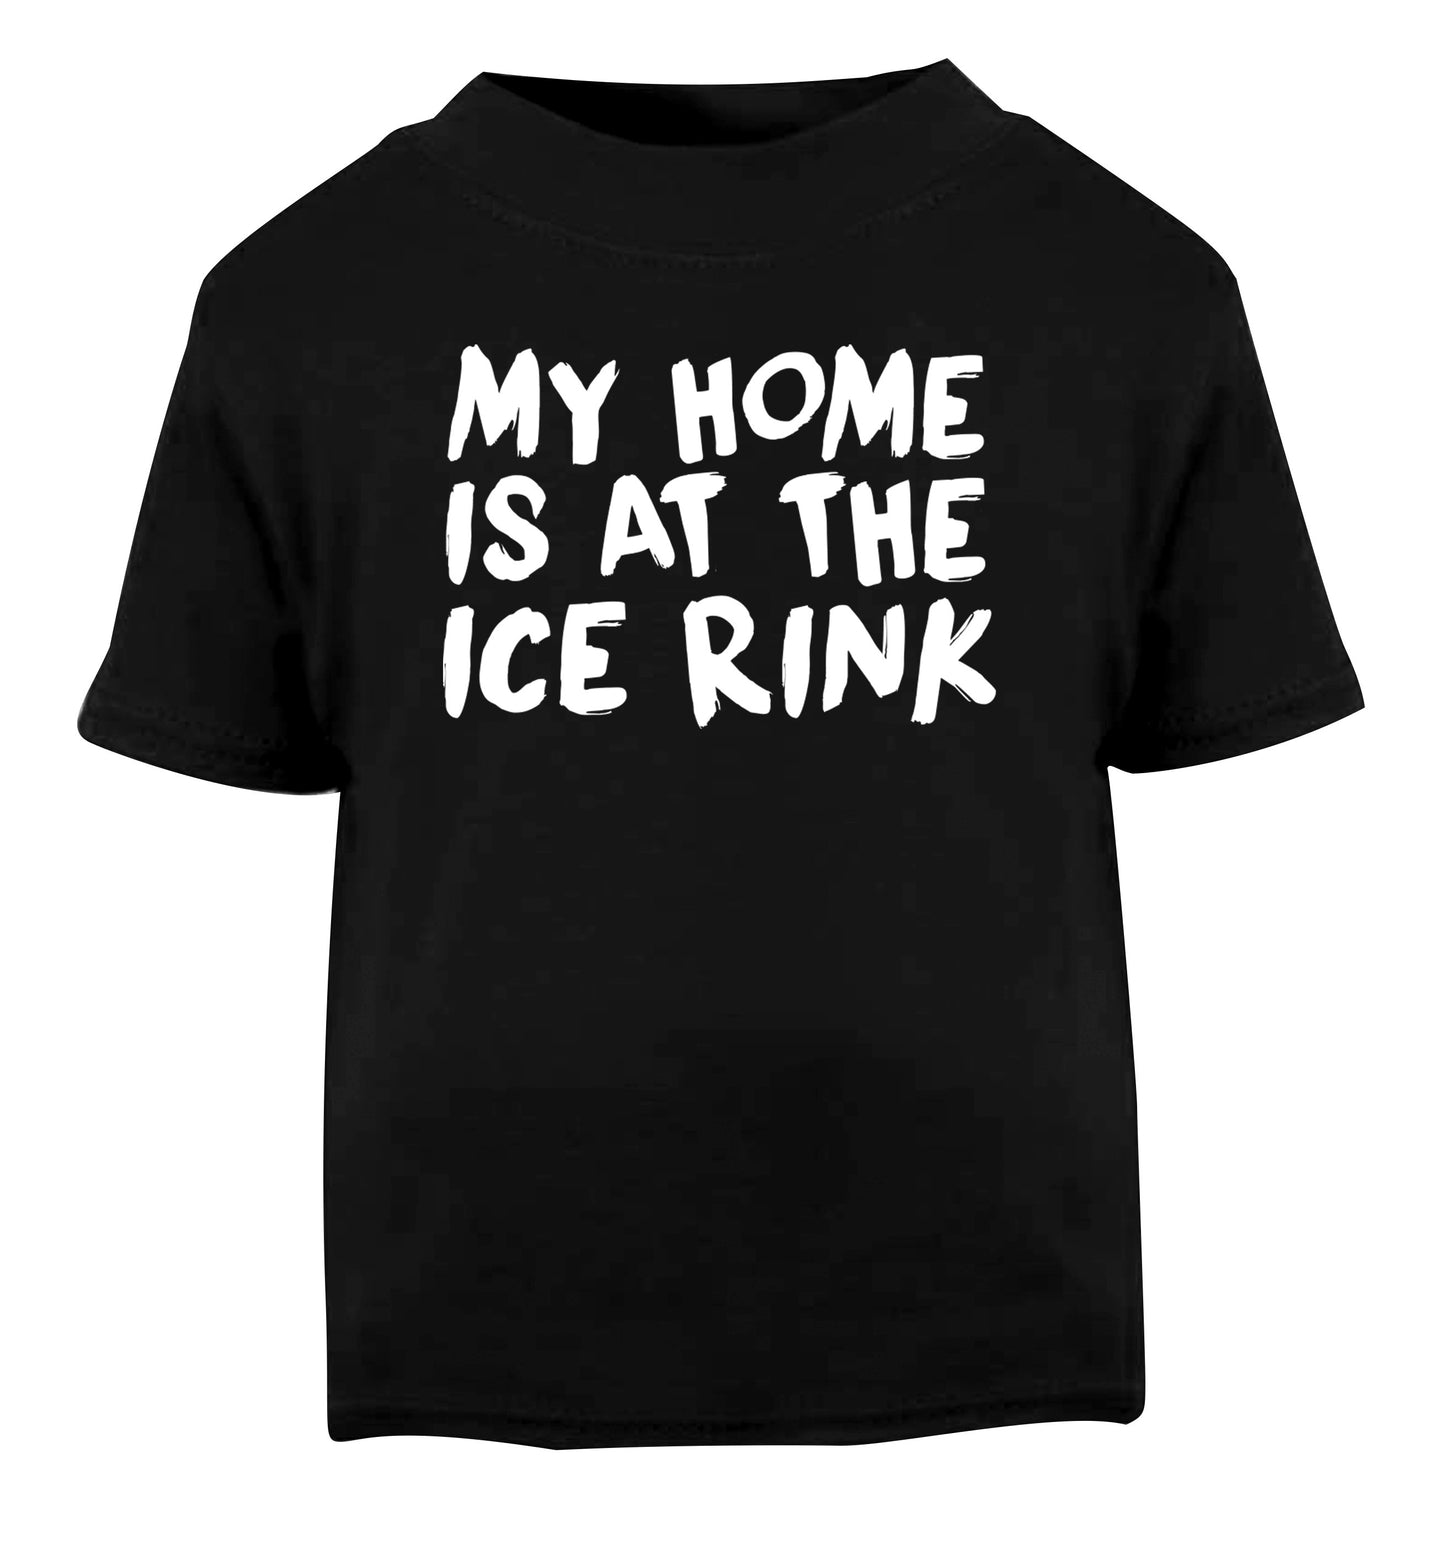 My home is at the ice rink Black Baby Toddler Tshirt 2 years